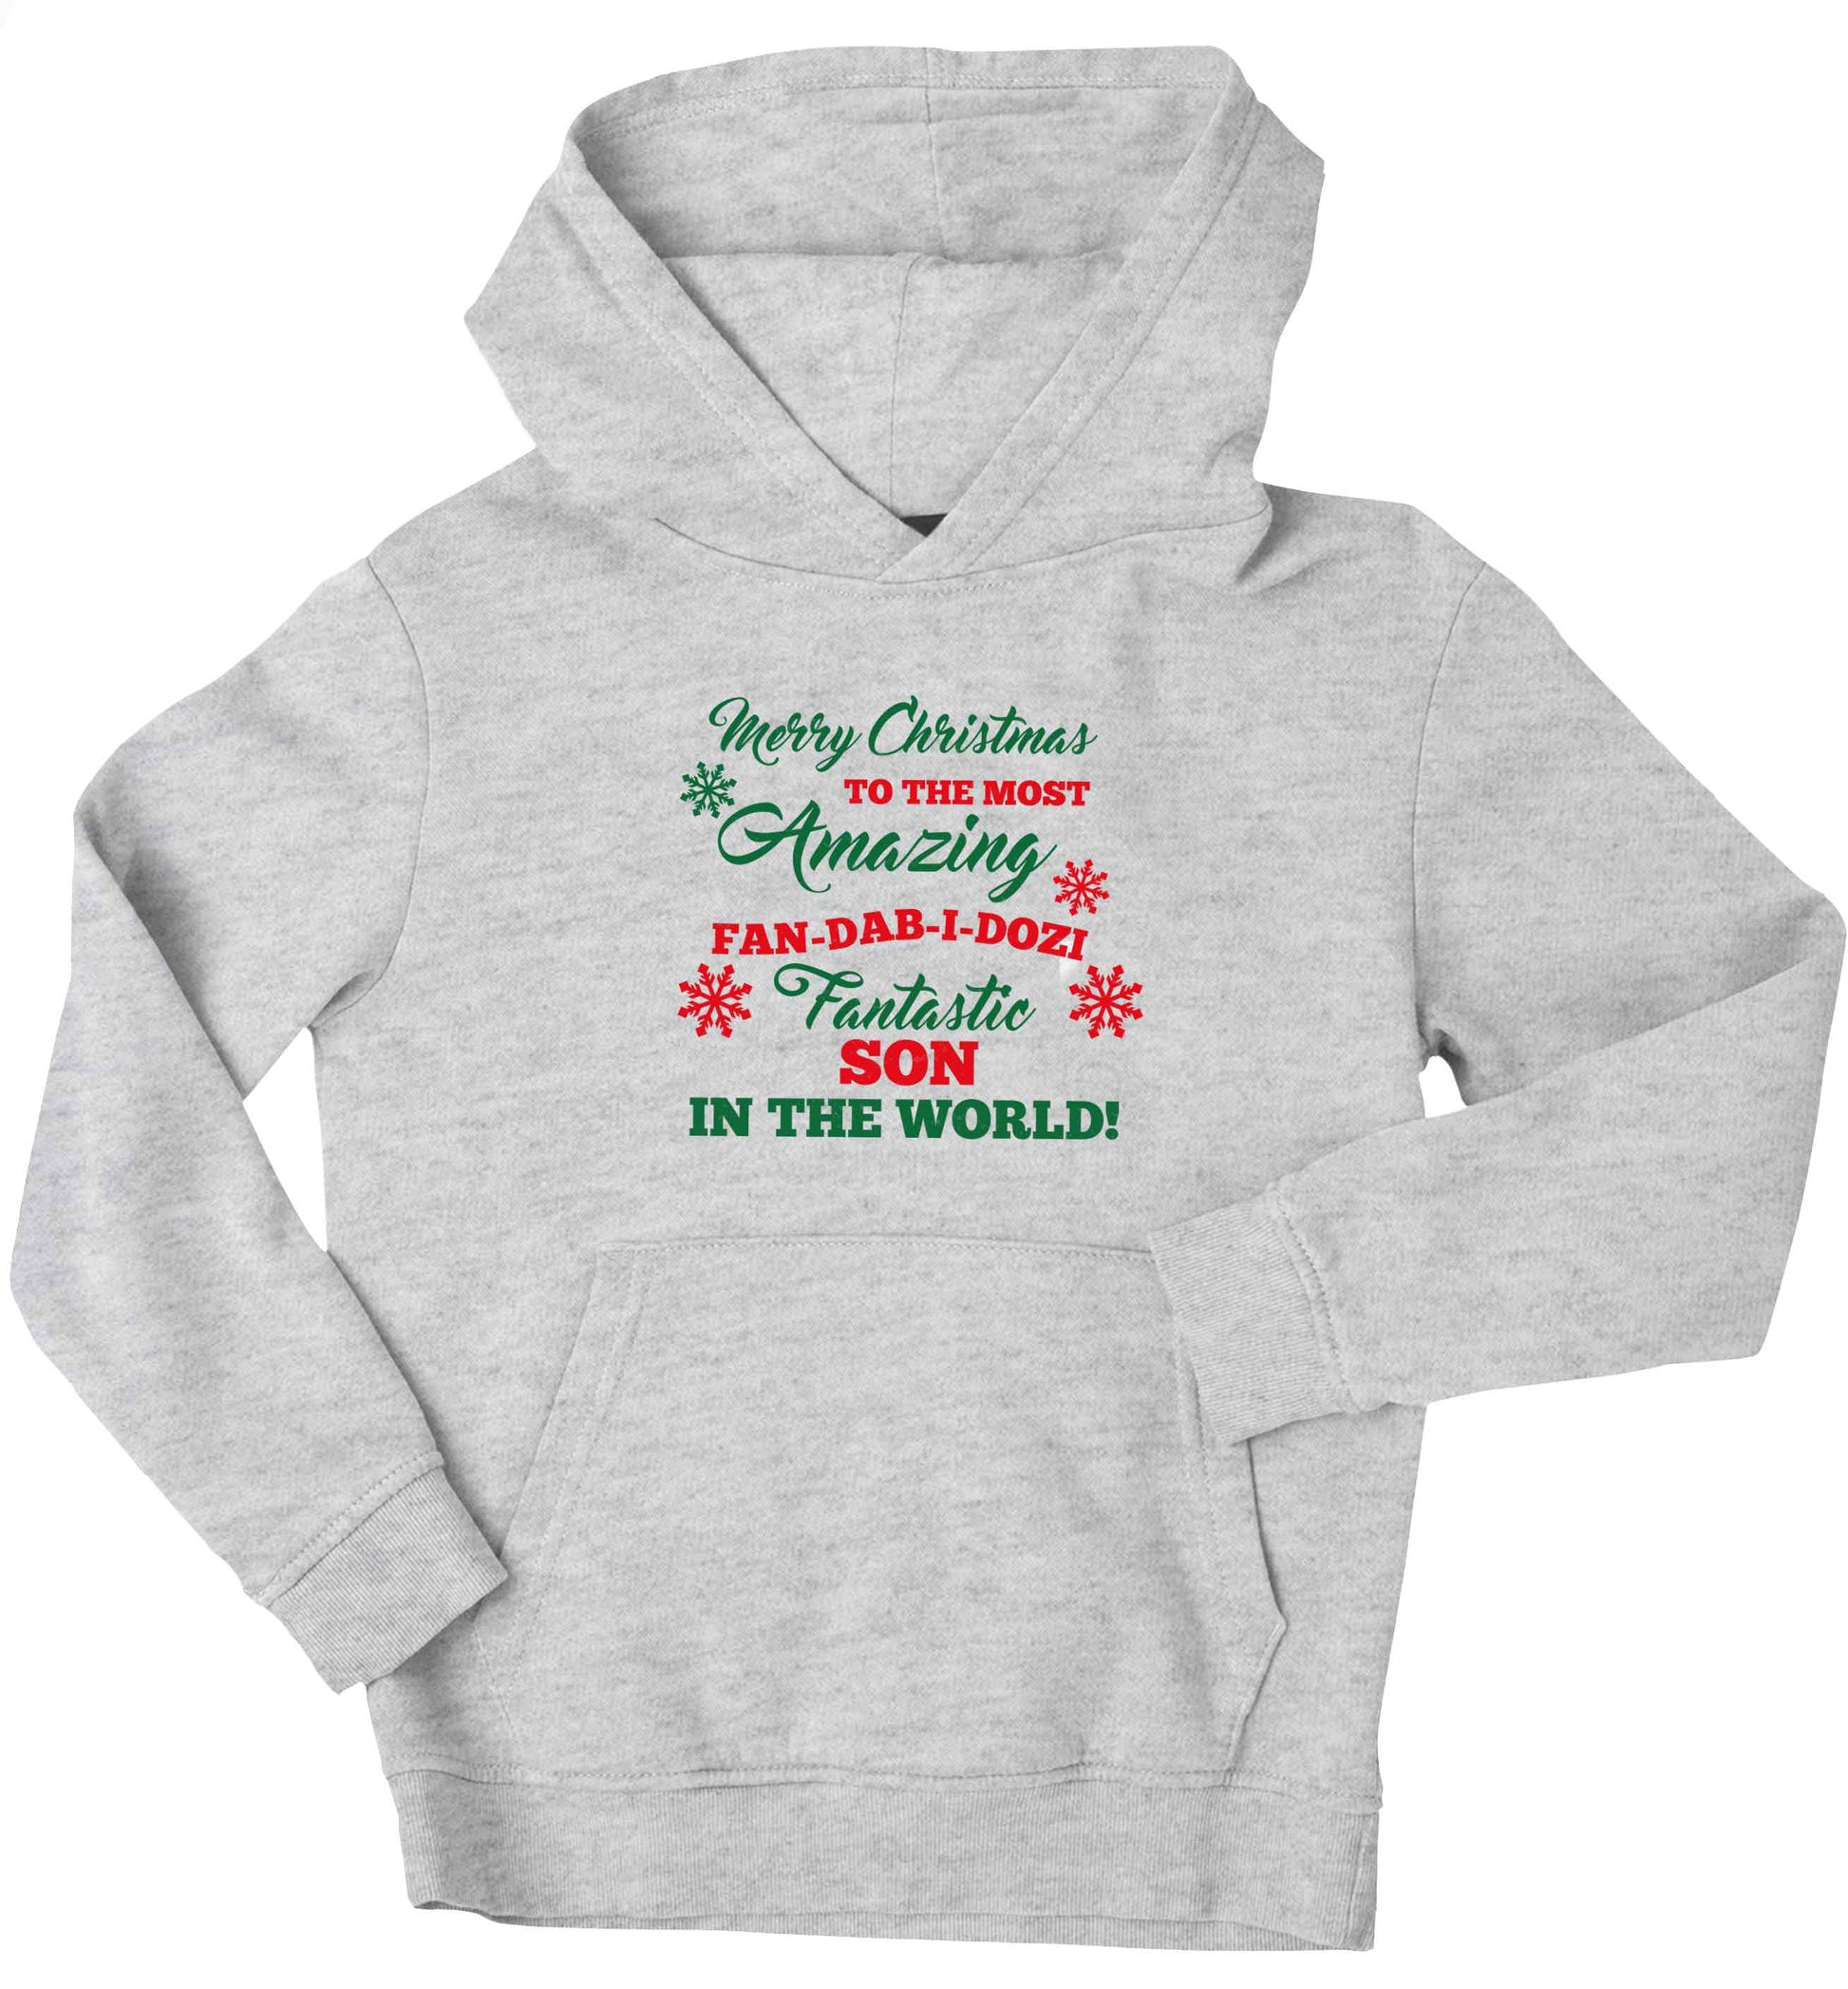 Merry Christmas to the most amazing fan-dab-i-dozi fantasic Son in the world children's grey hoodie 12-13 Years